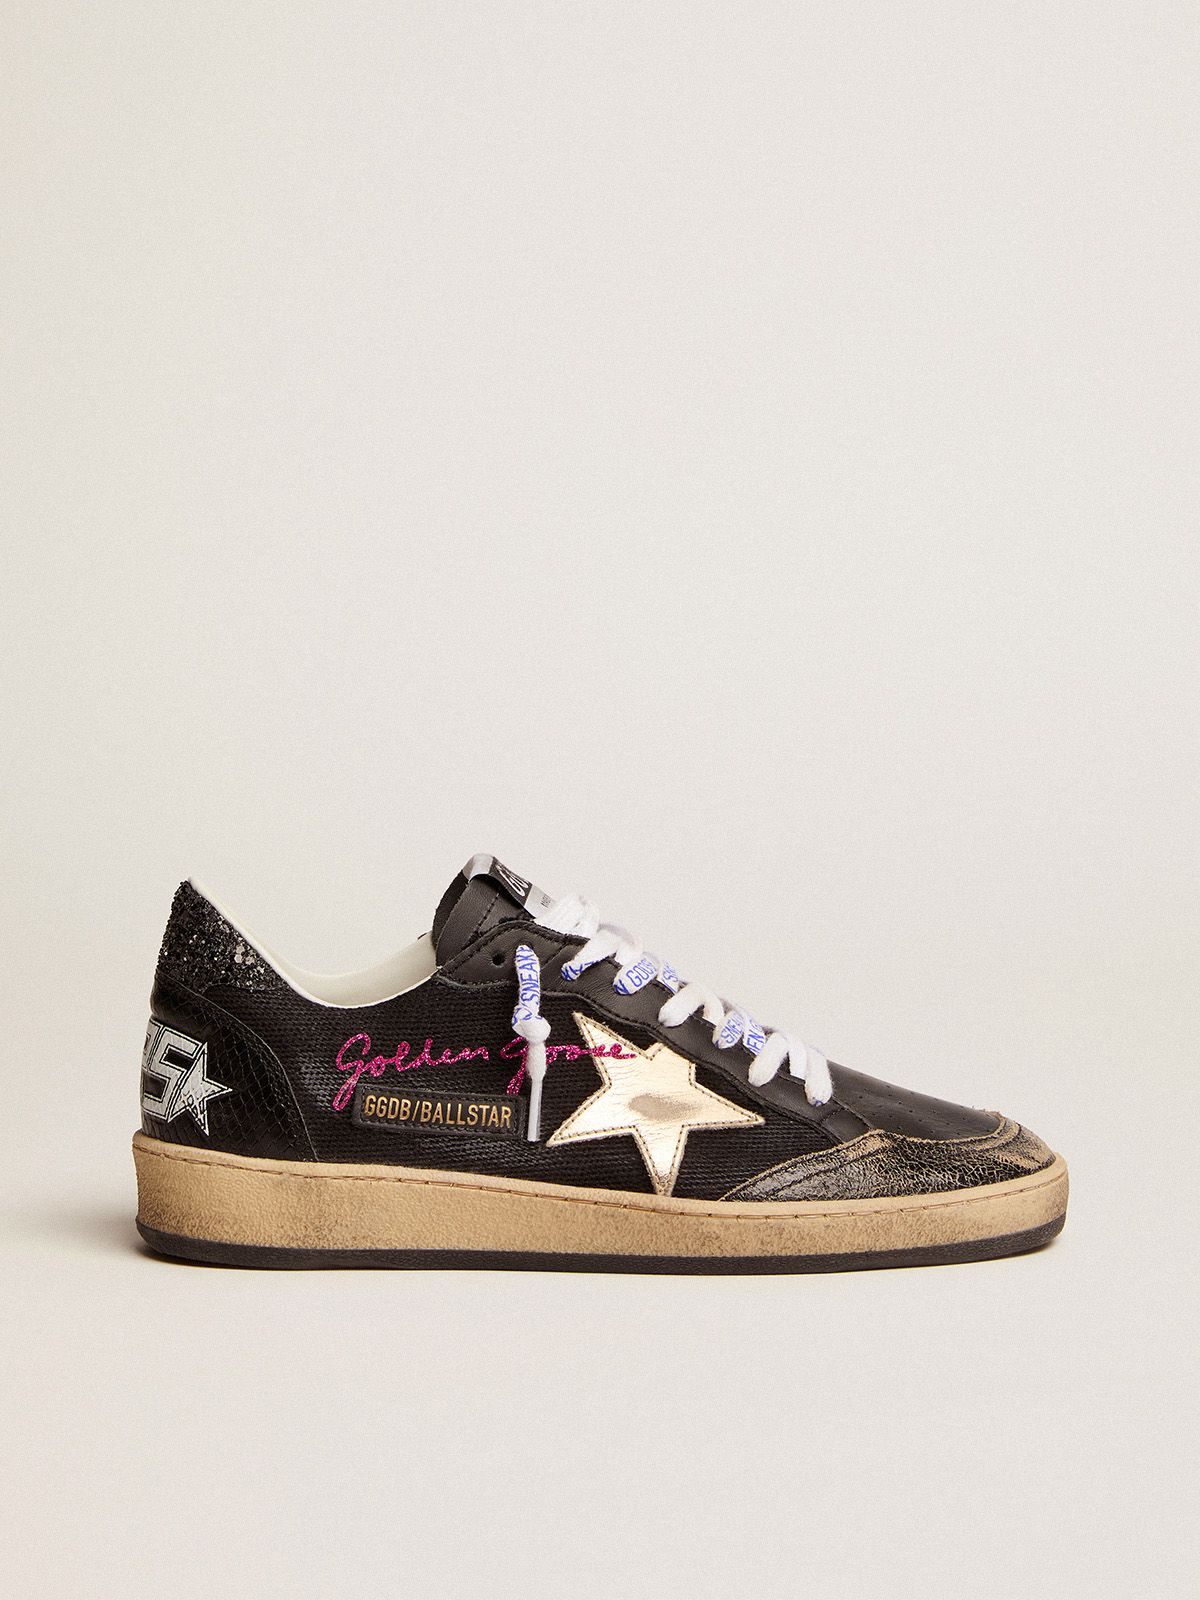 Ball Star sneakers in black canvas with platinum metallic leather star and black glitter heel tab | 